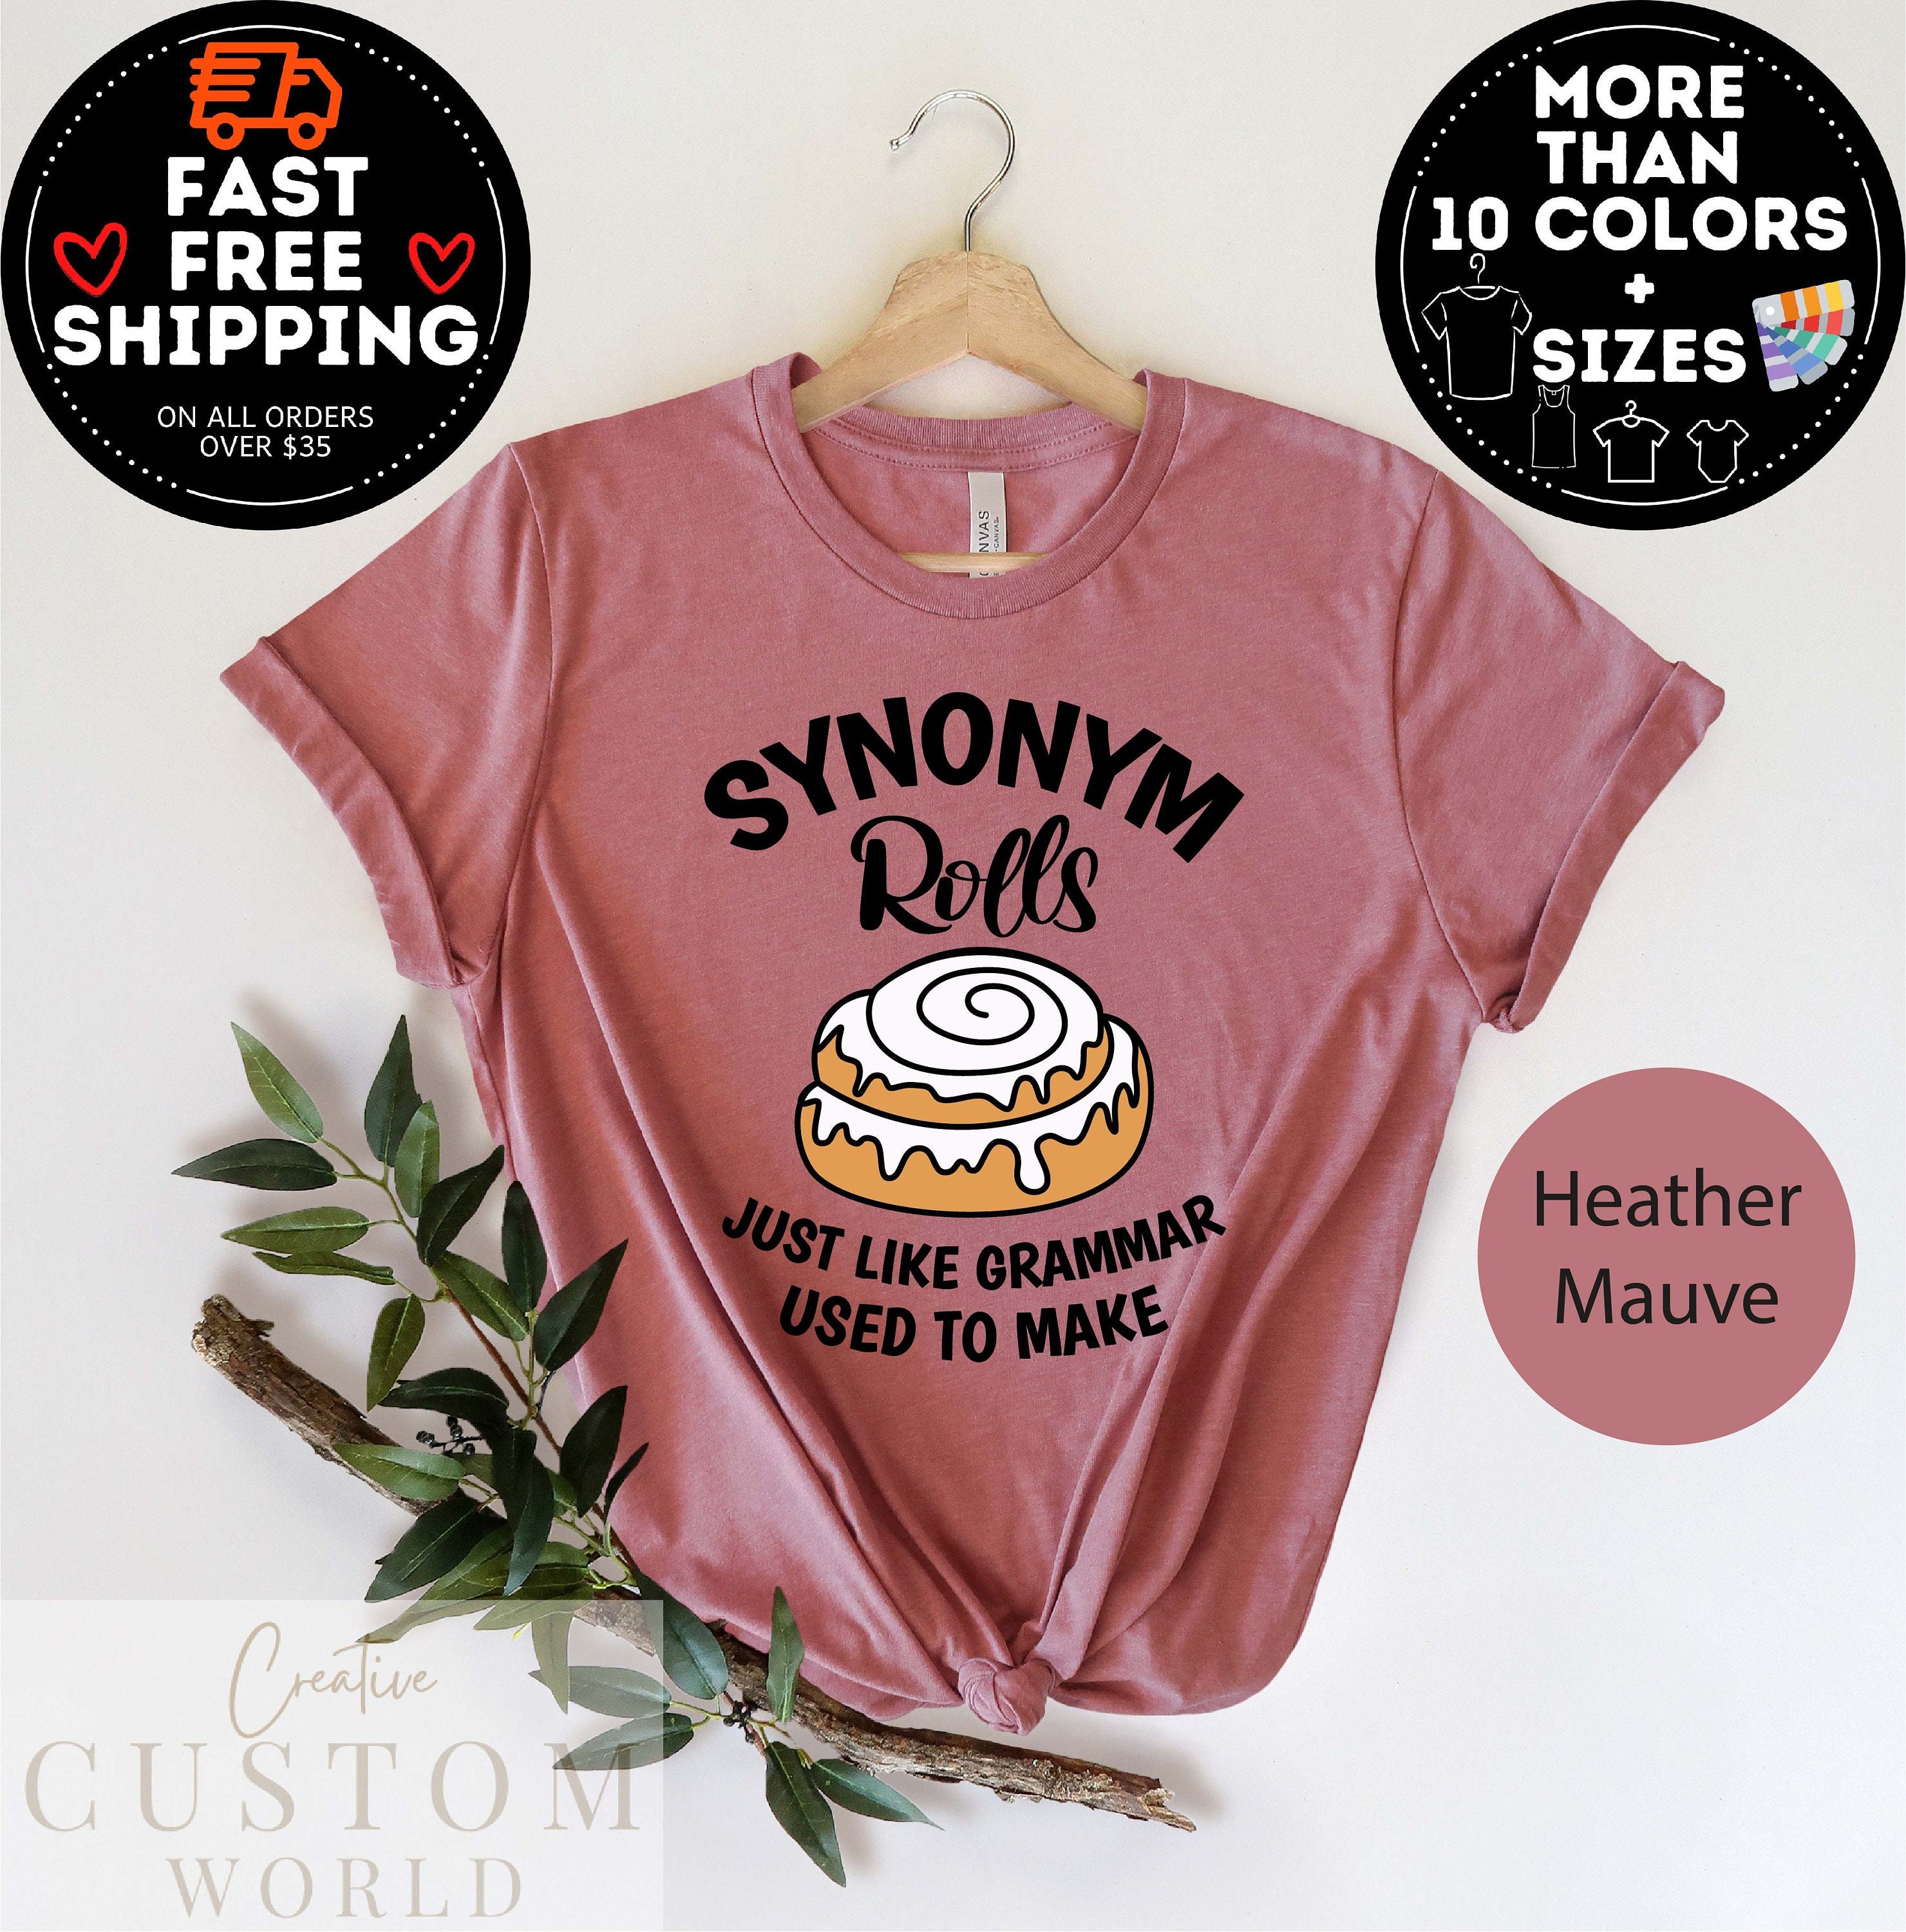 Mens Synonym Rolls Just Like Grammar Used To Make T Shirt Funny Cinnamon  Roll Joke Graphic Tee For Guys (Heather Red) - XXL Graphic Tees 